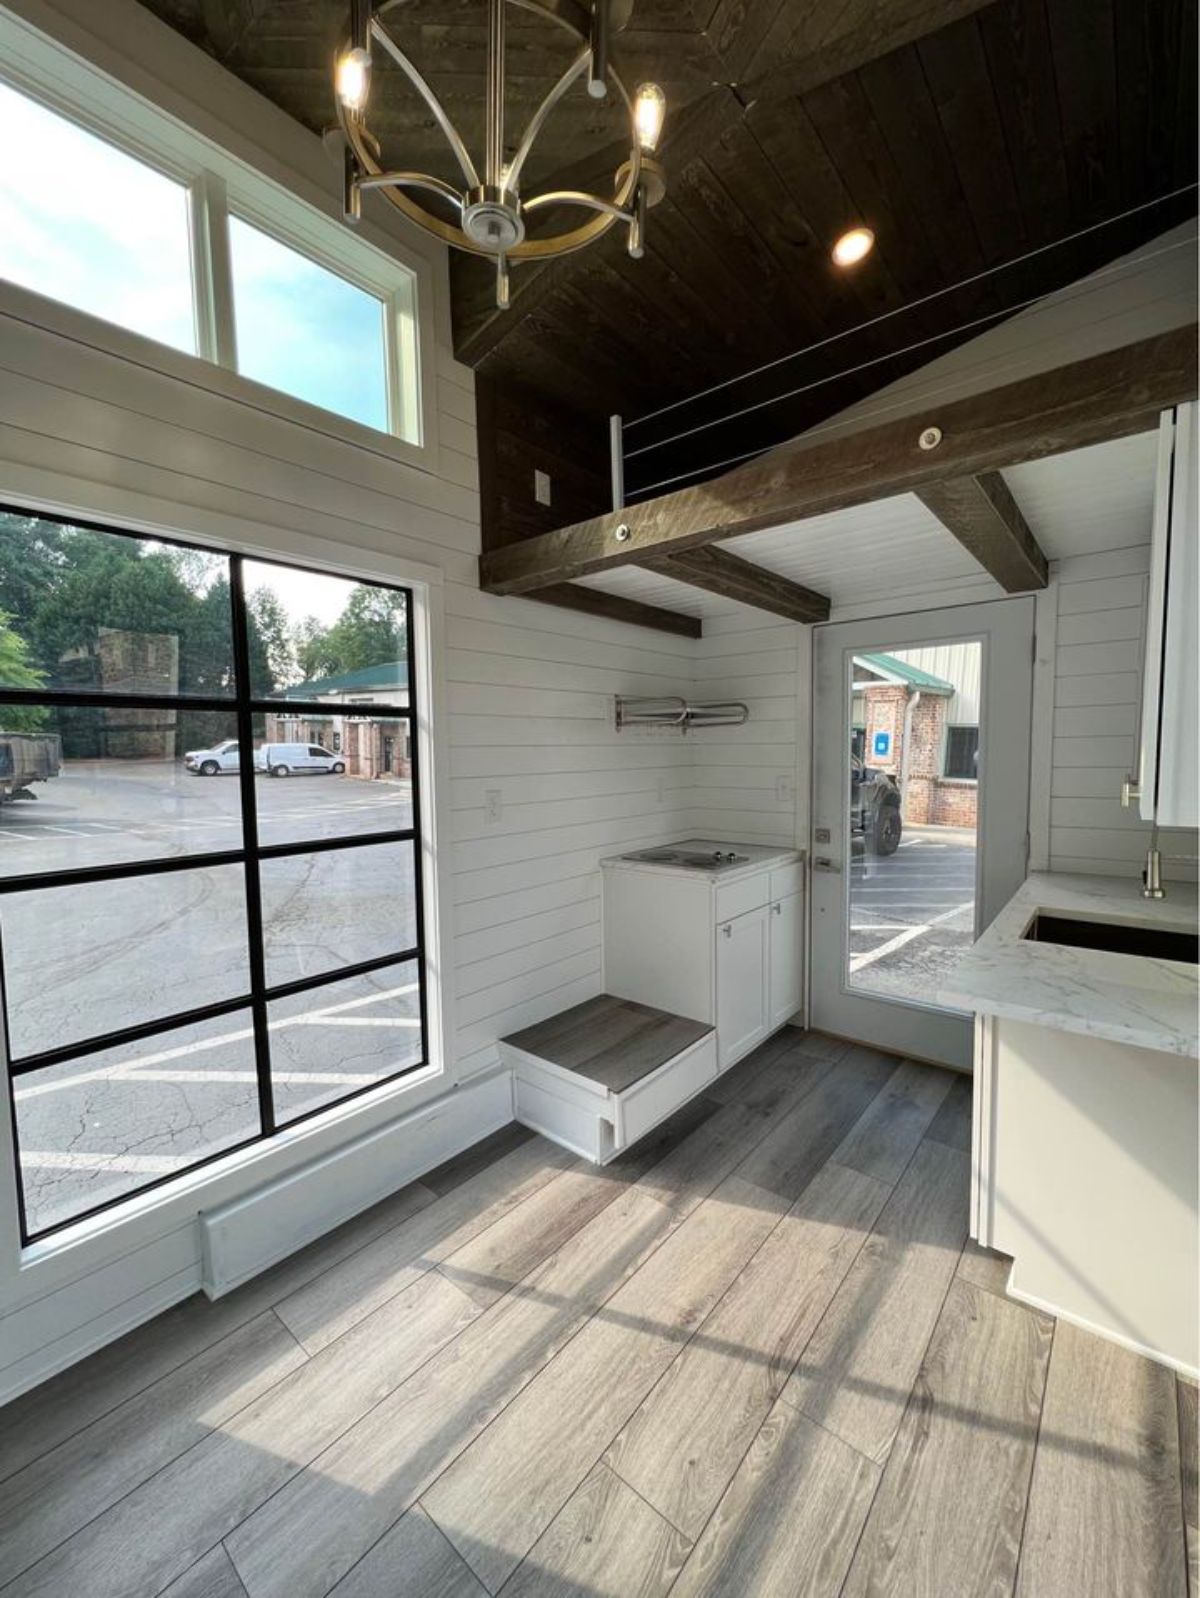 Kitchen area of 16’ Modern Tiny House is divided into 2 parts opposite to each other